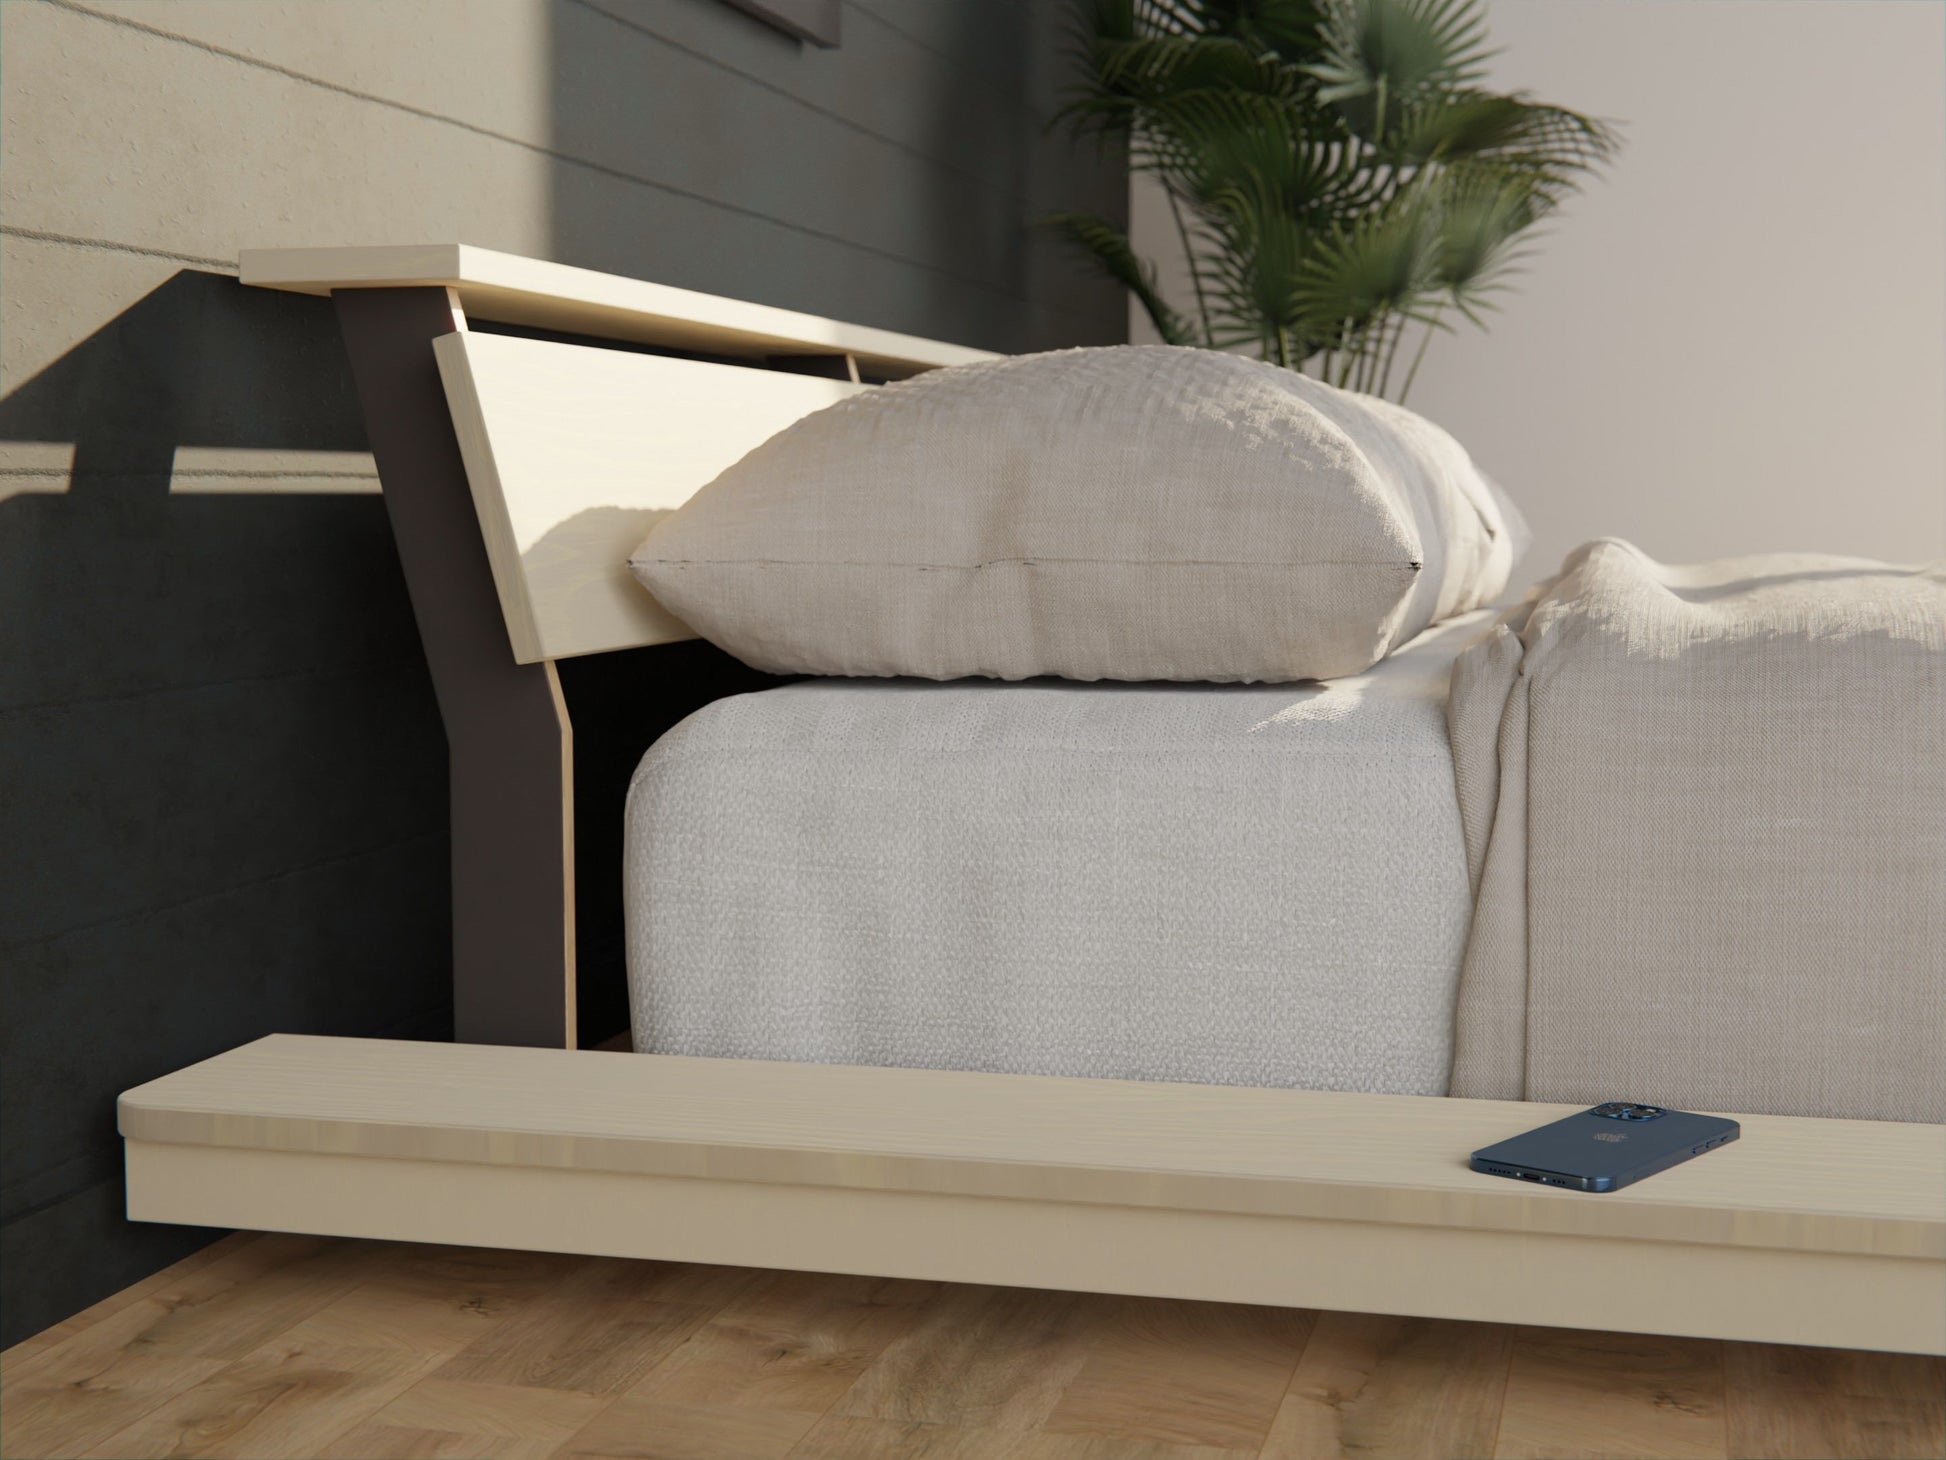 Introducing our versatile low-to-floor bed frames. Solid wood floating platform frames offer a comfortable and stylish sleep experience in any size.